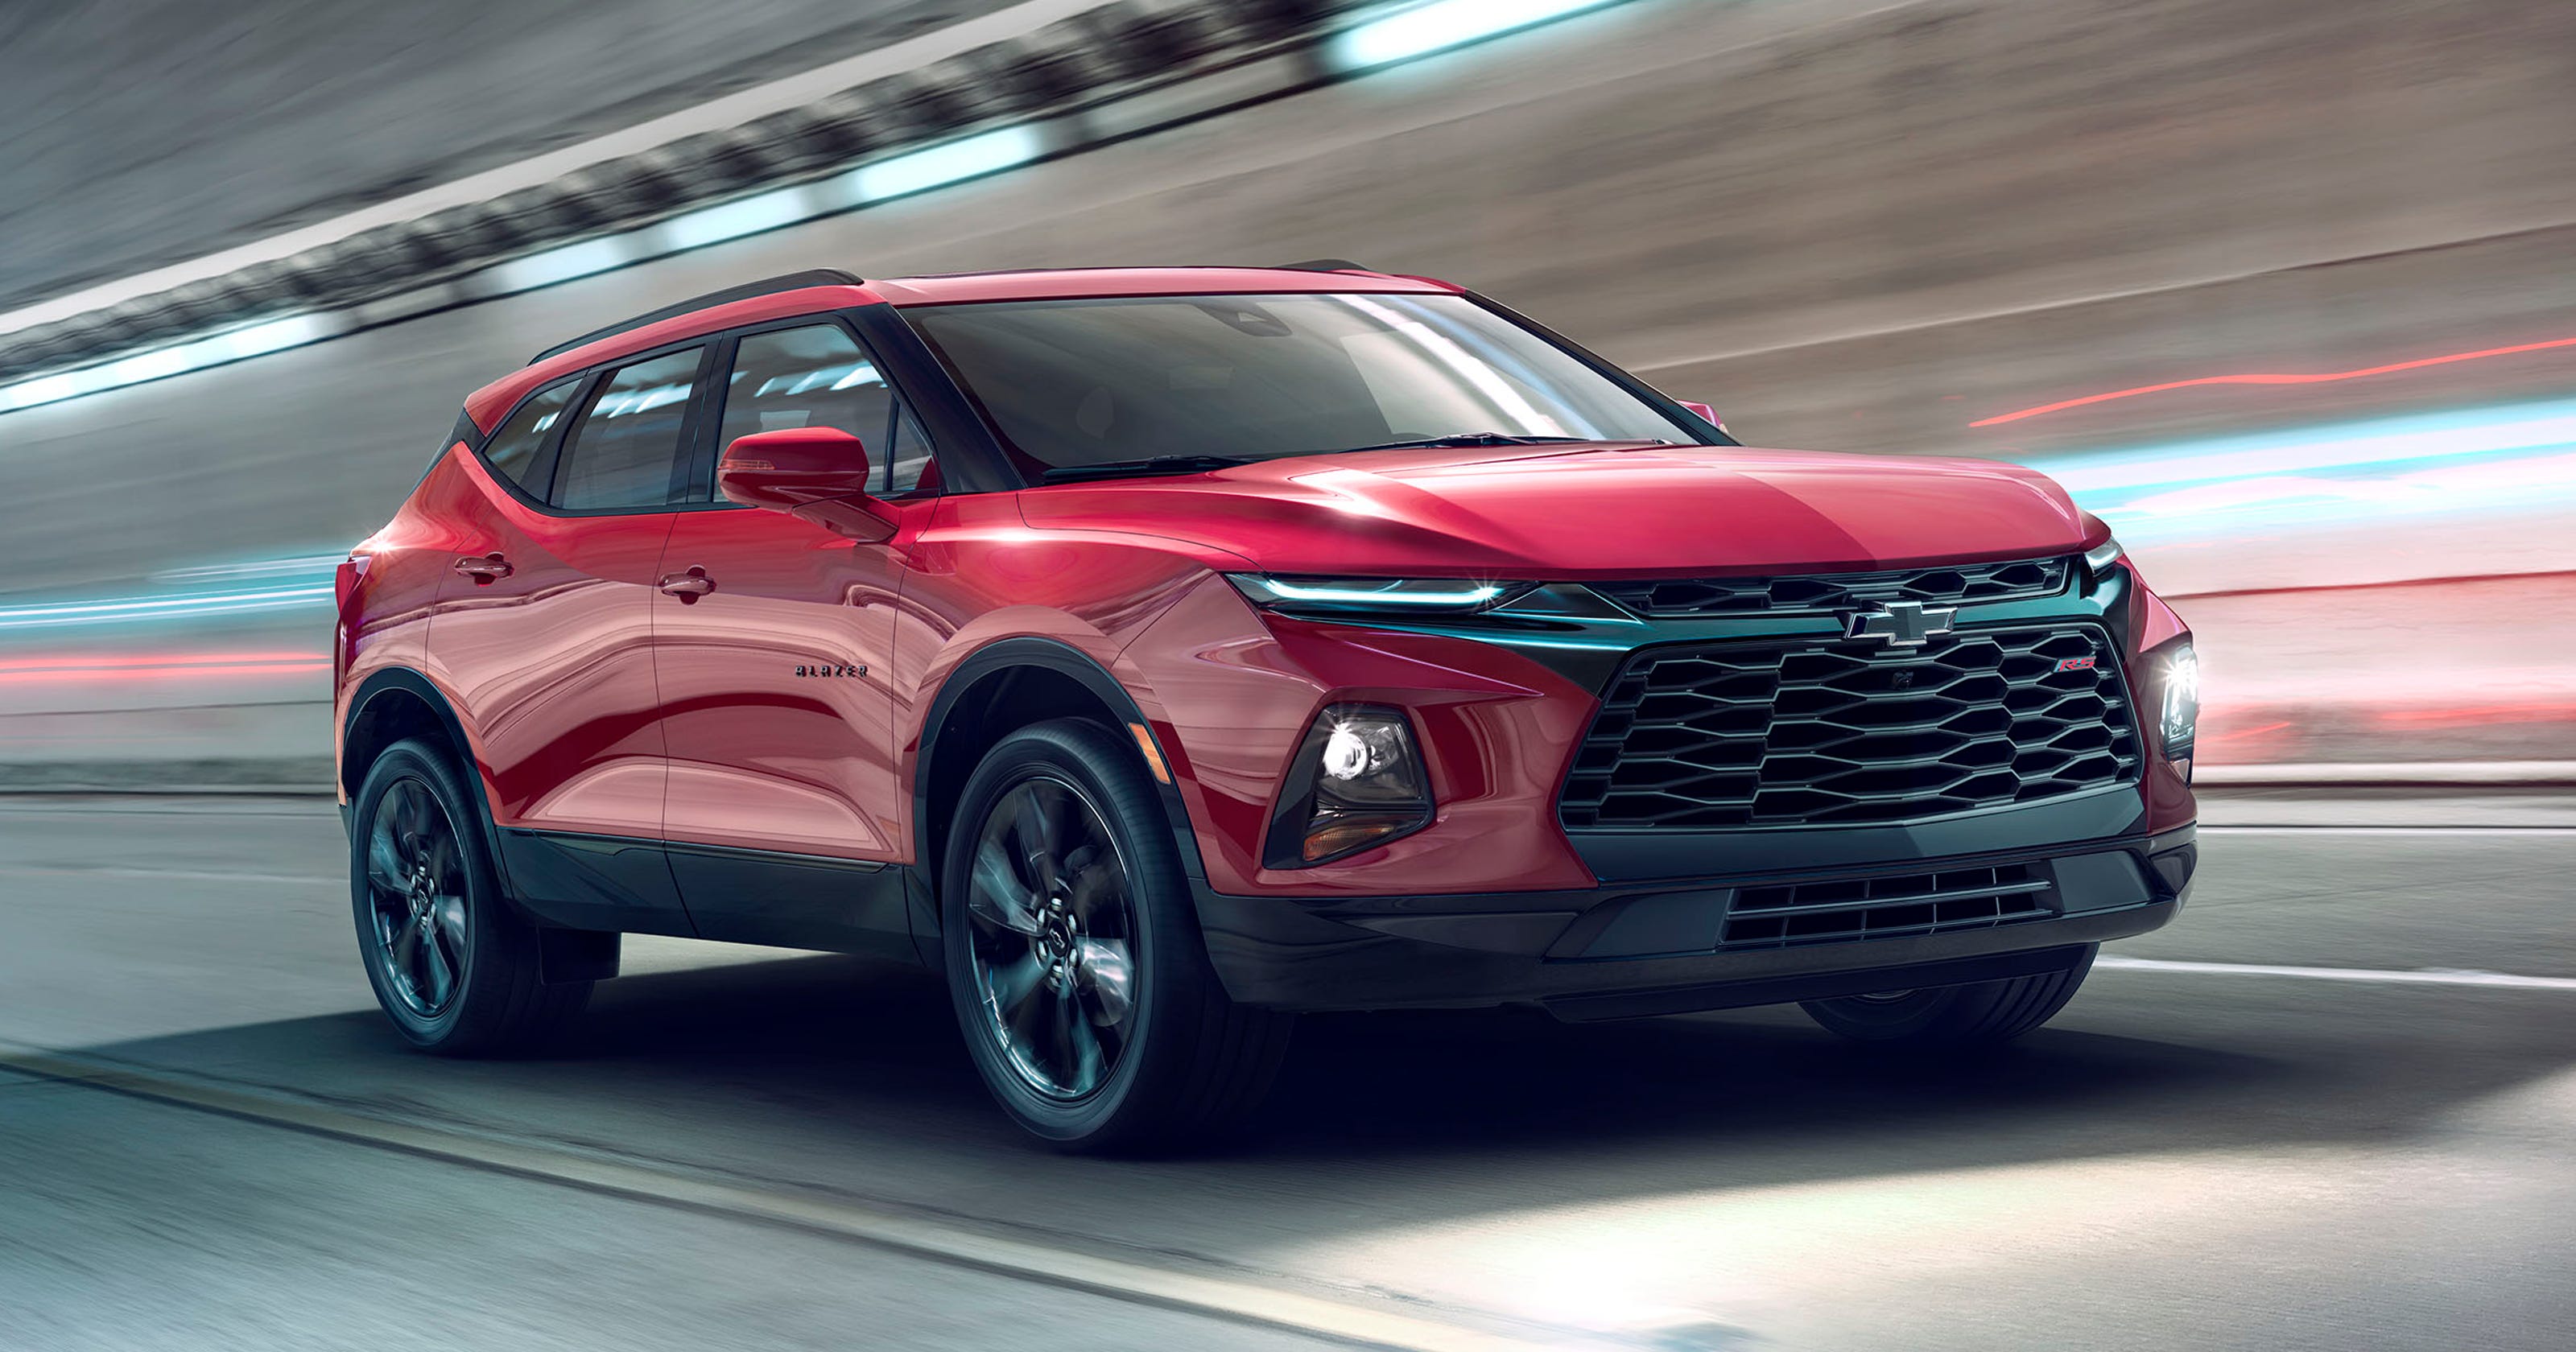 Chevy targets midsize SUV hunger with a new Blazer